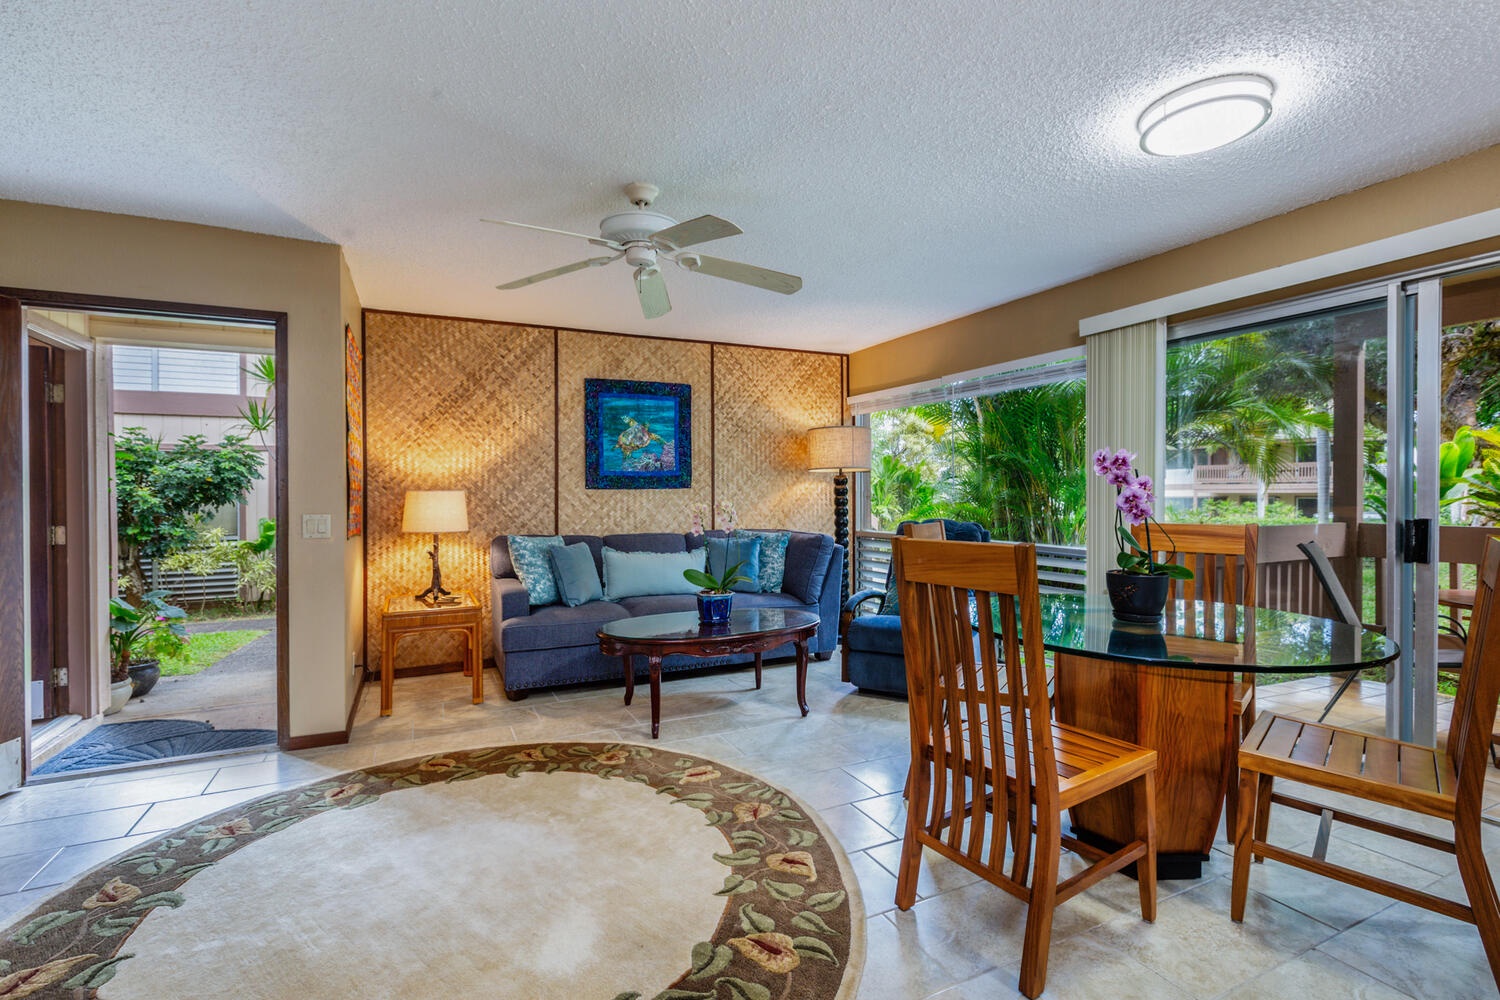 Princeville Vacation Rentals, Hideaway Haven - Relax in the inviting living area, featuring a plush couch and glass-walled access to a serene patio.